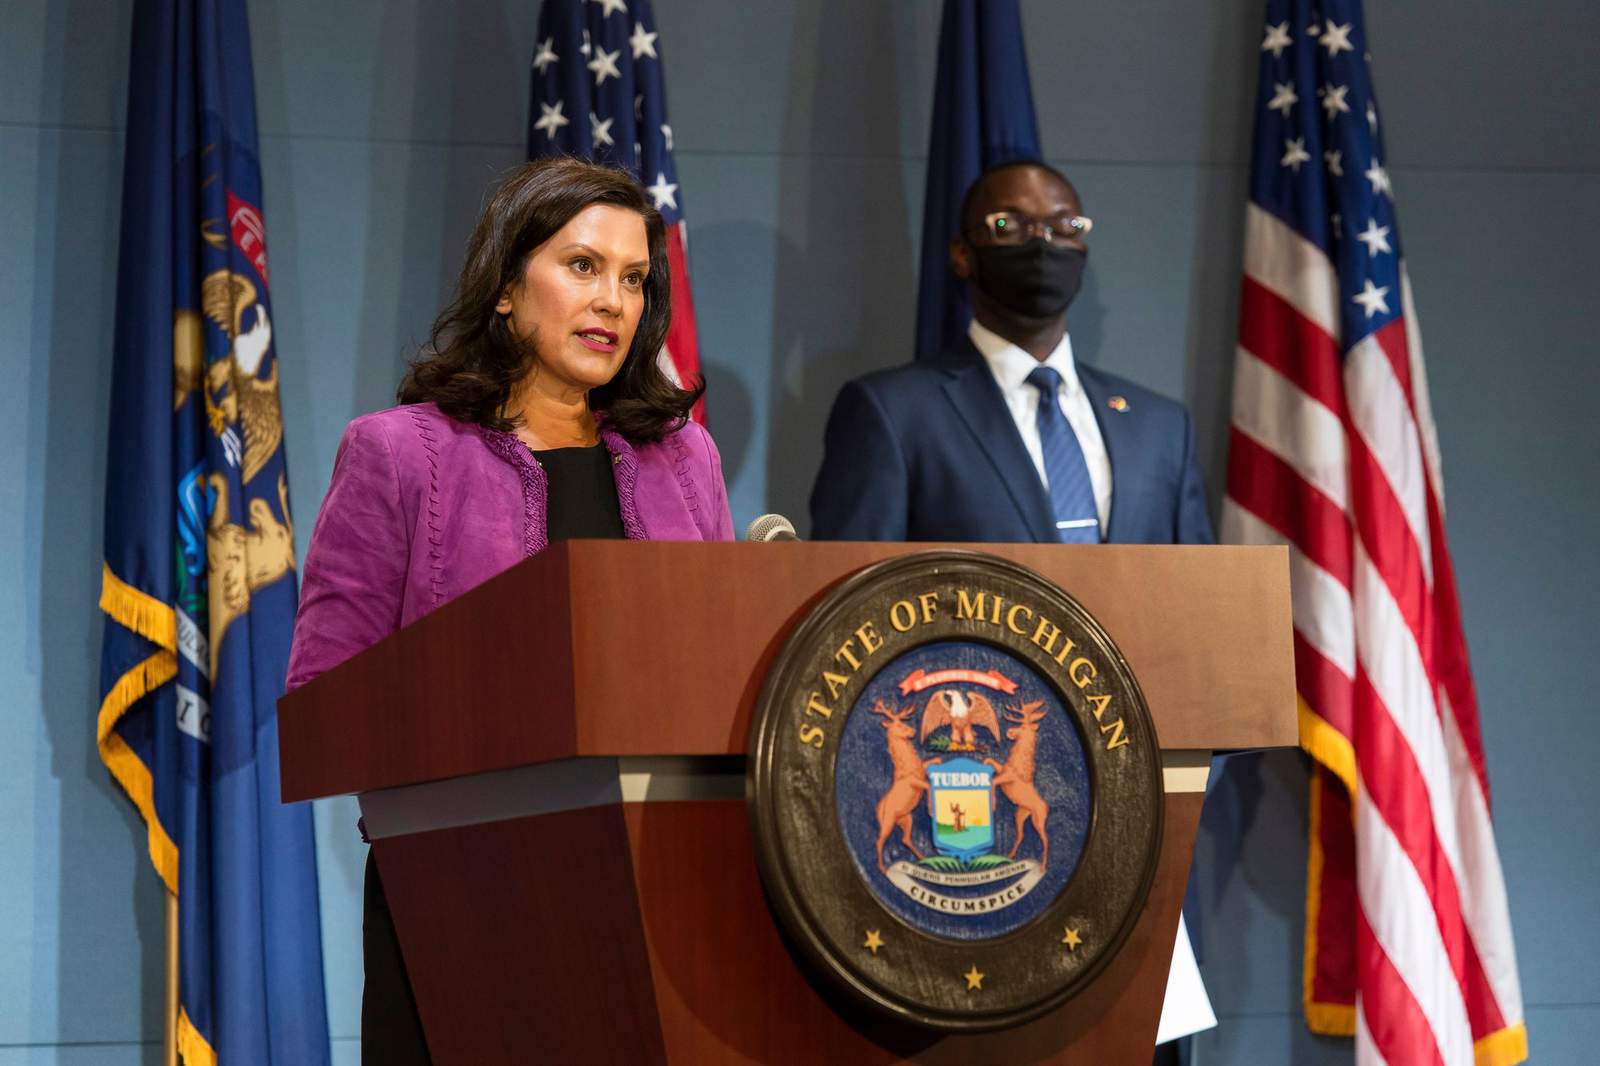 Gov. Whitmer signs order requiring children, workers to wear masks at Michigan childcare centers, camps